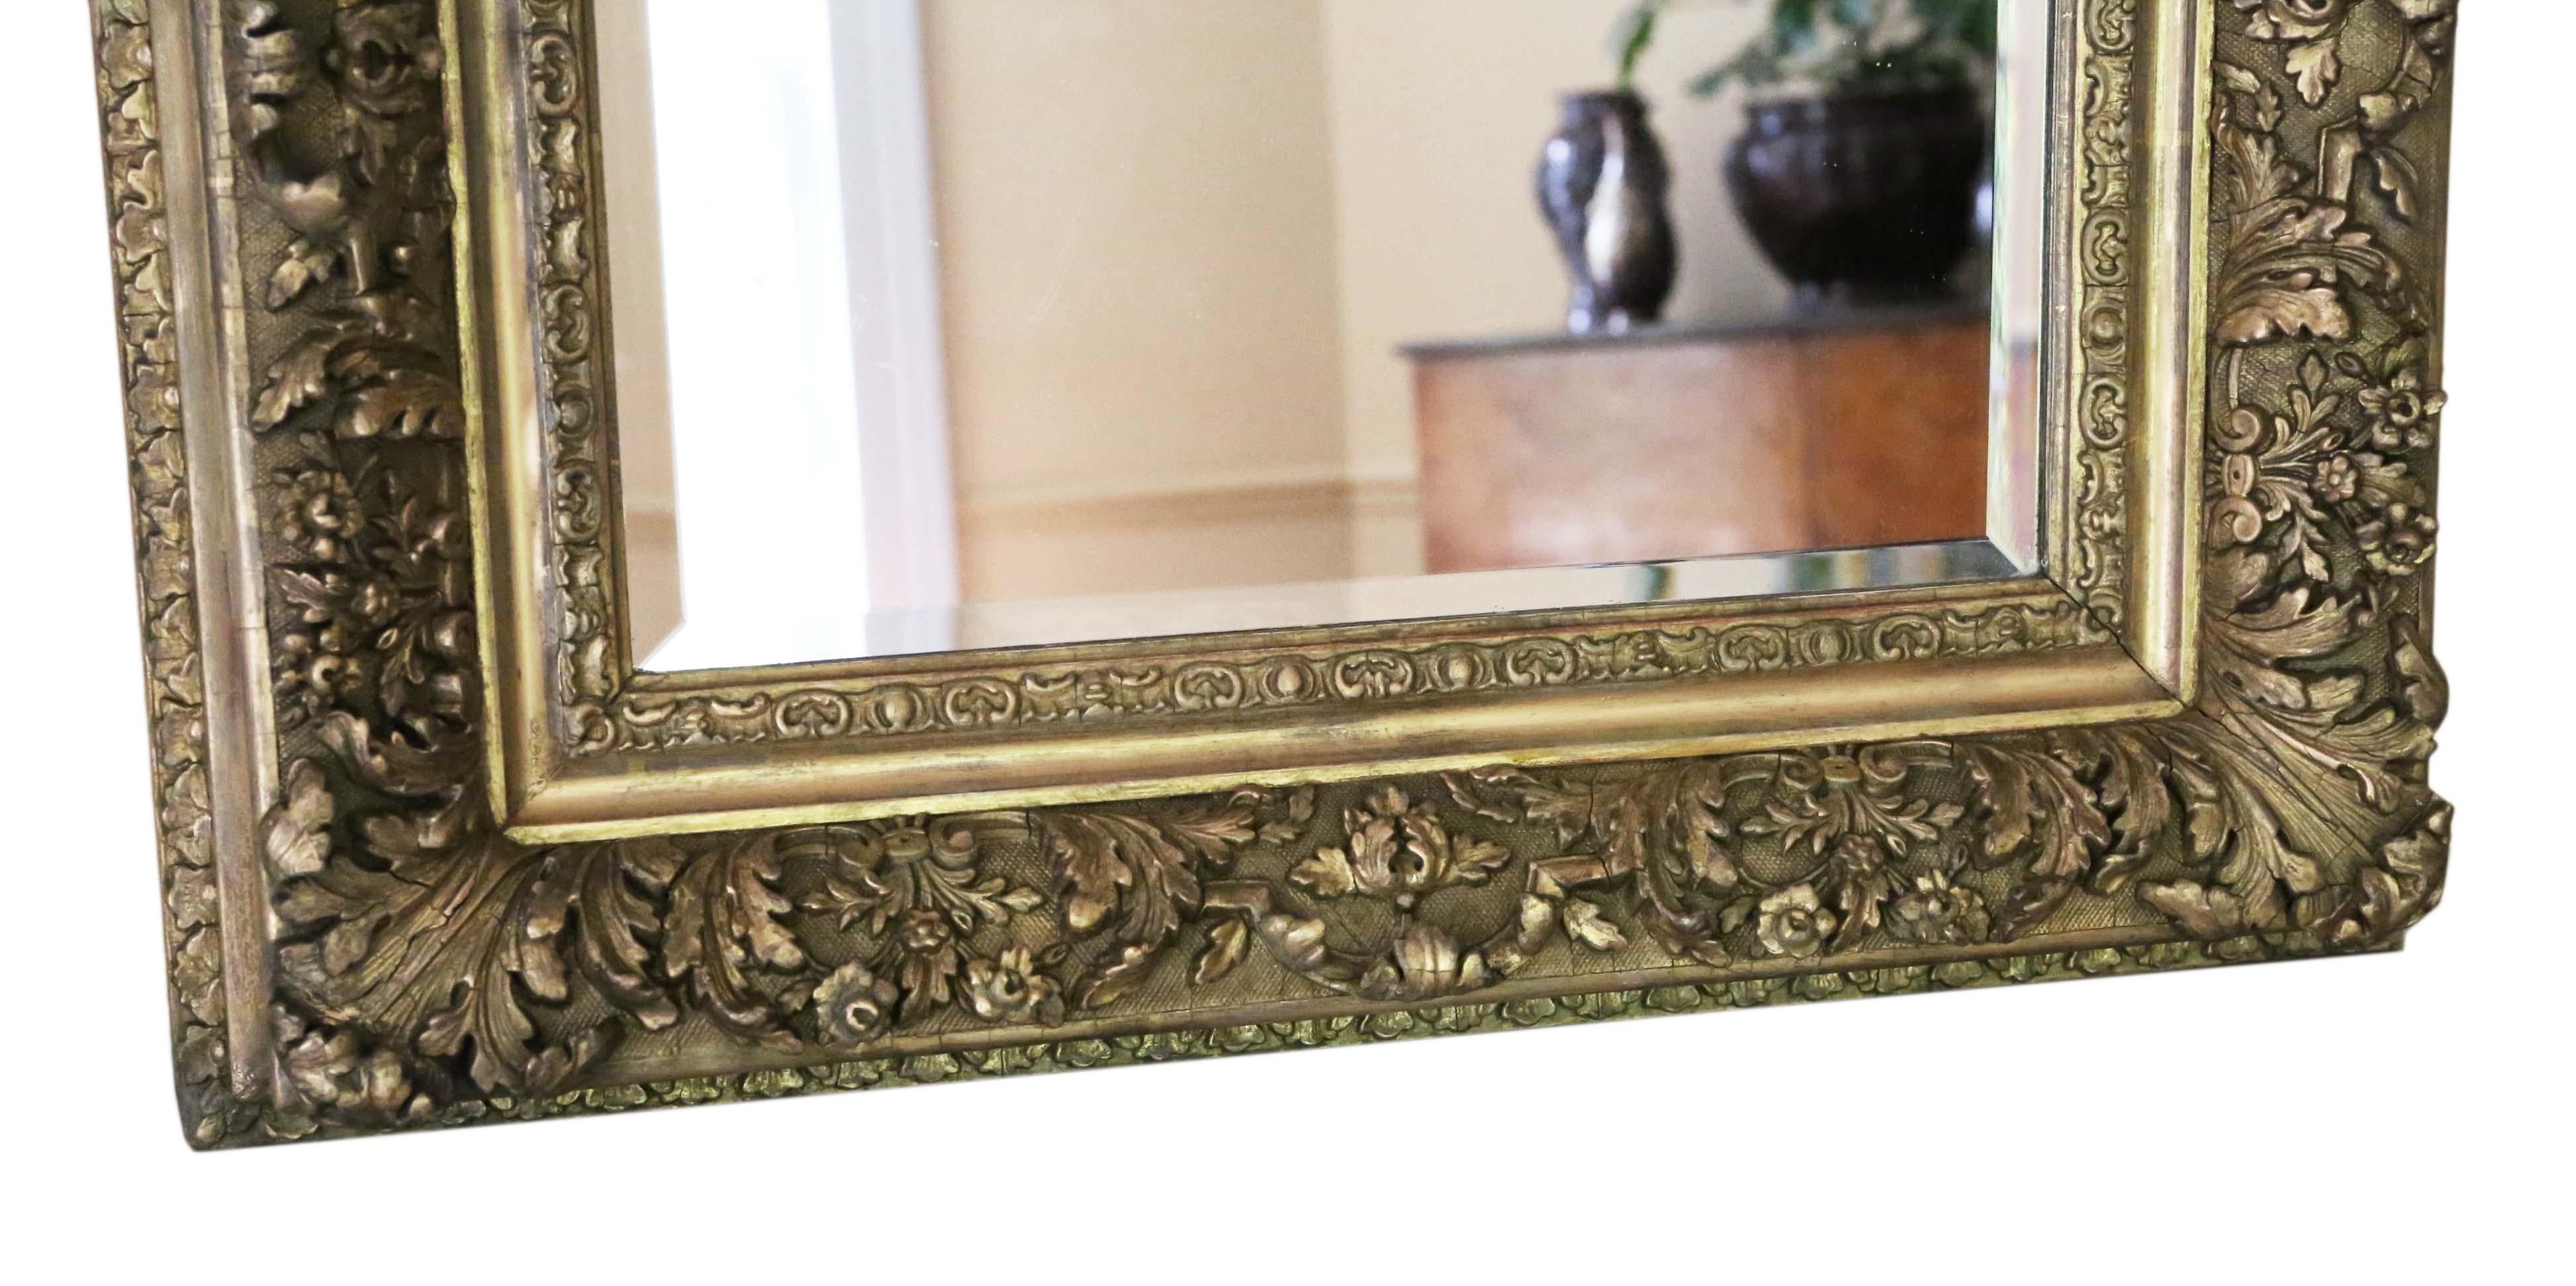 Antique Large Gilt 19th Century Overmantle Wall Mirror In Good Condition For Sale In Wisbech, Cambridgeshire